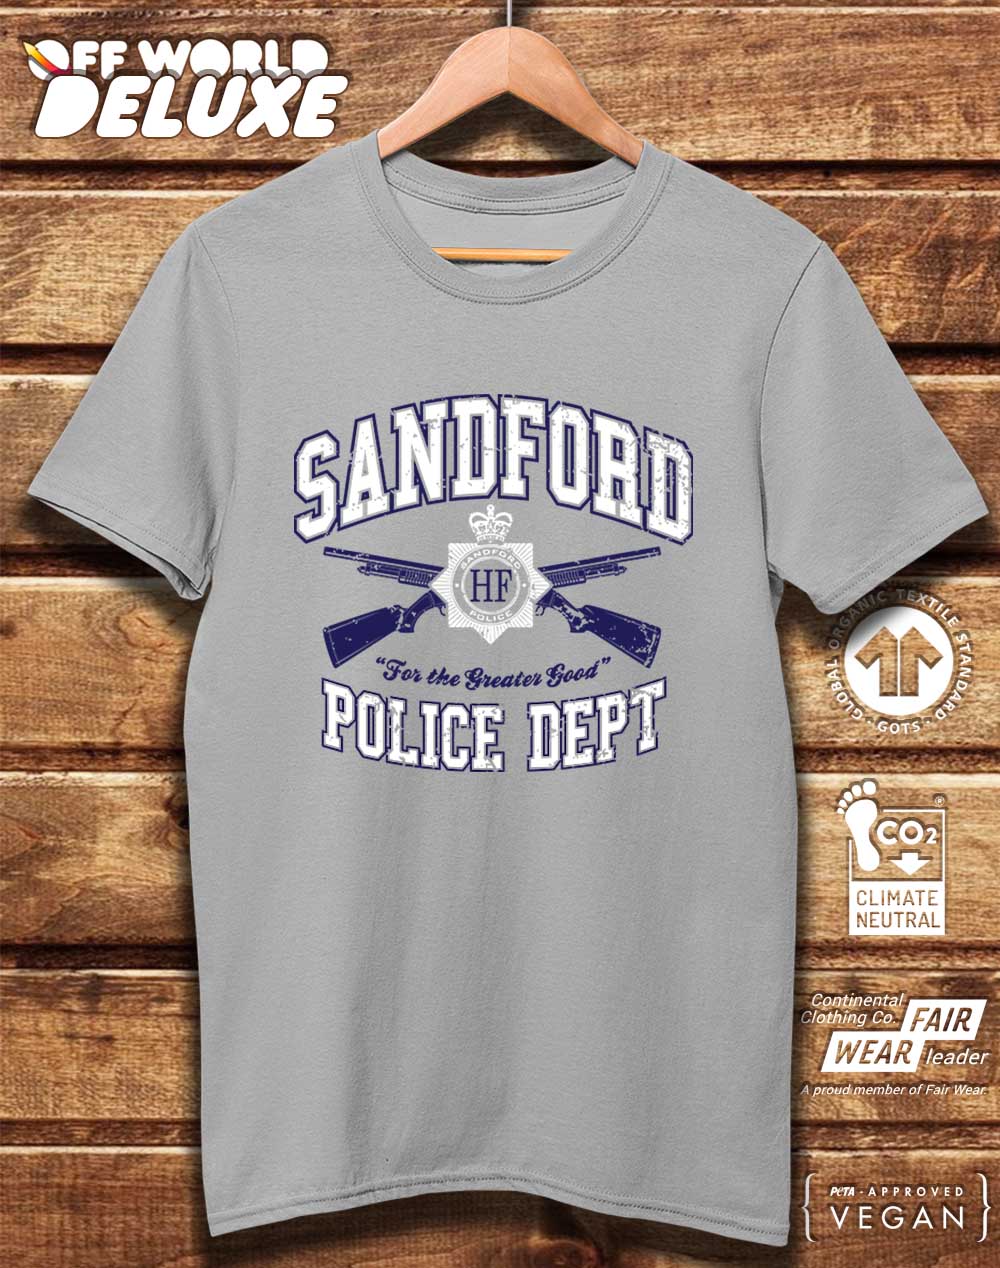 DELUXE Sandford Police Dept Organic Cotton T-Shirt